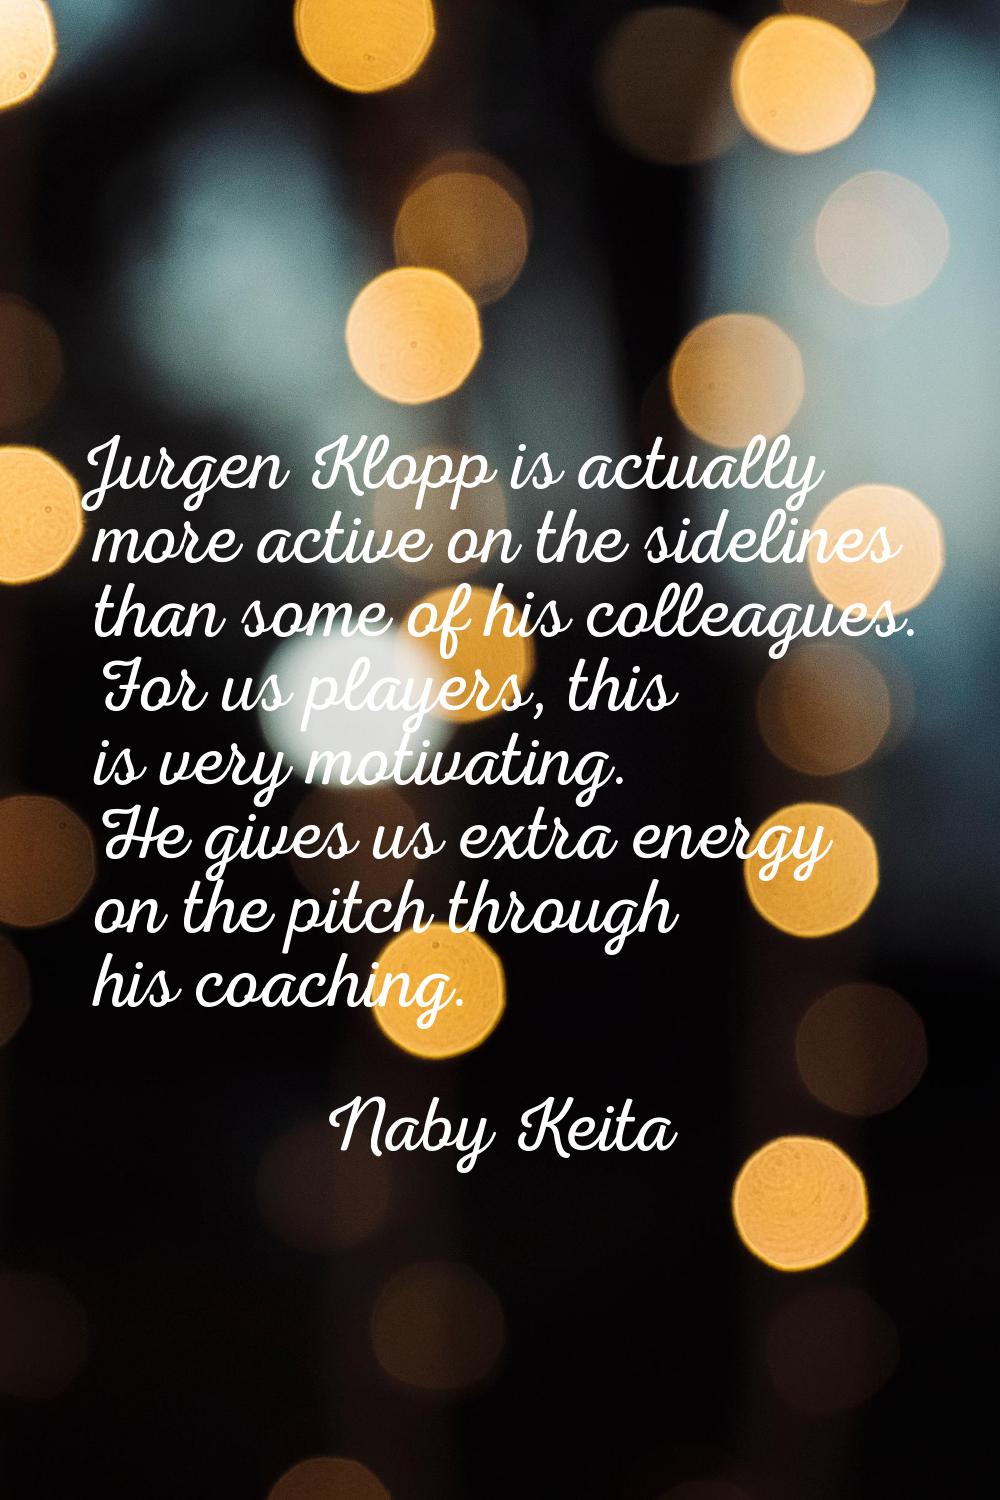 Jurgen Klopp is actually more active on the sidelines than some of his colleagues. For us players, 